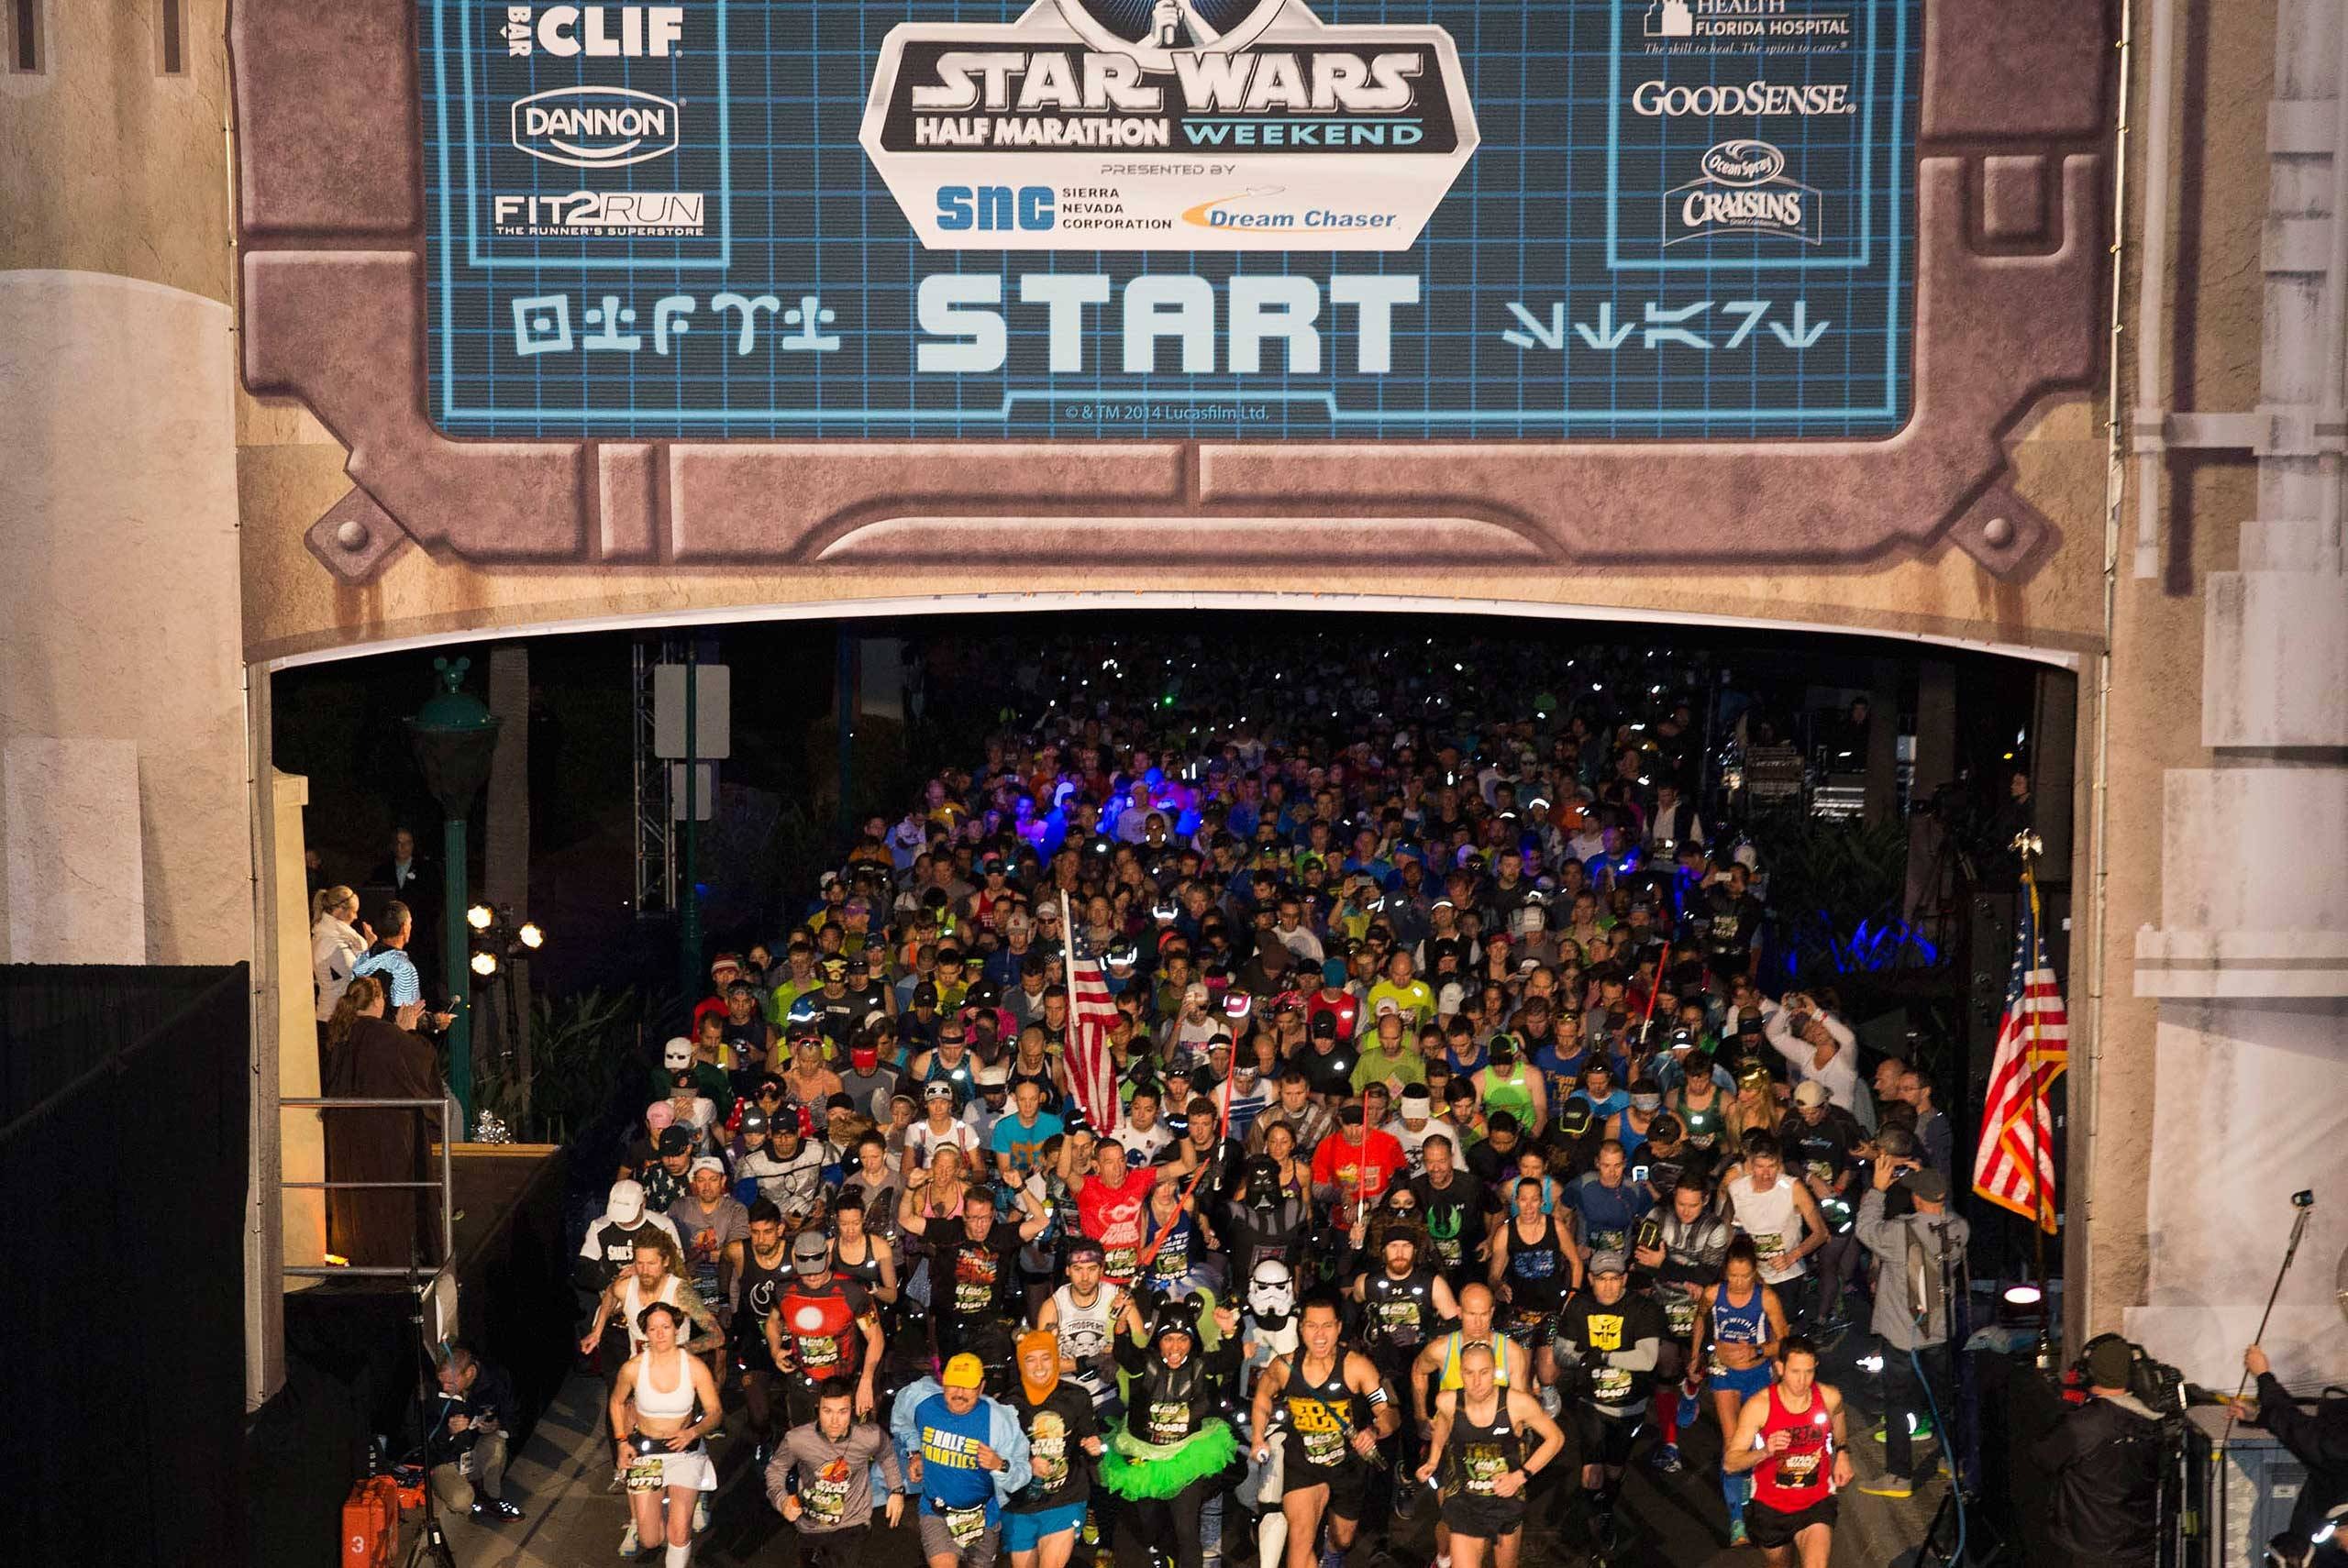 How Many People In The Star Wars Half Marathon?